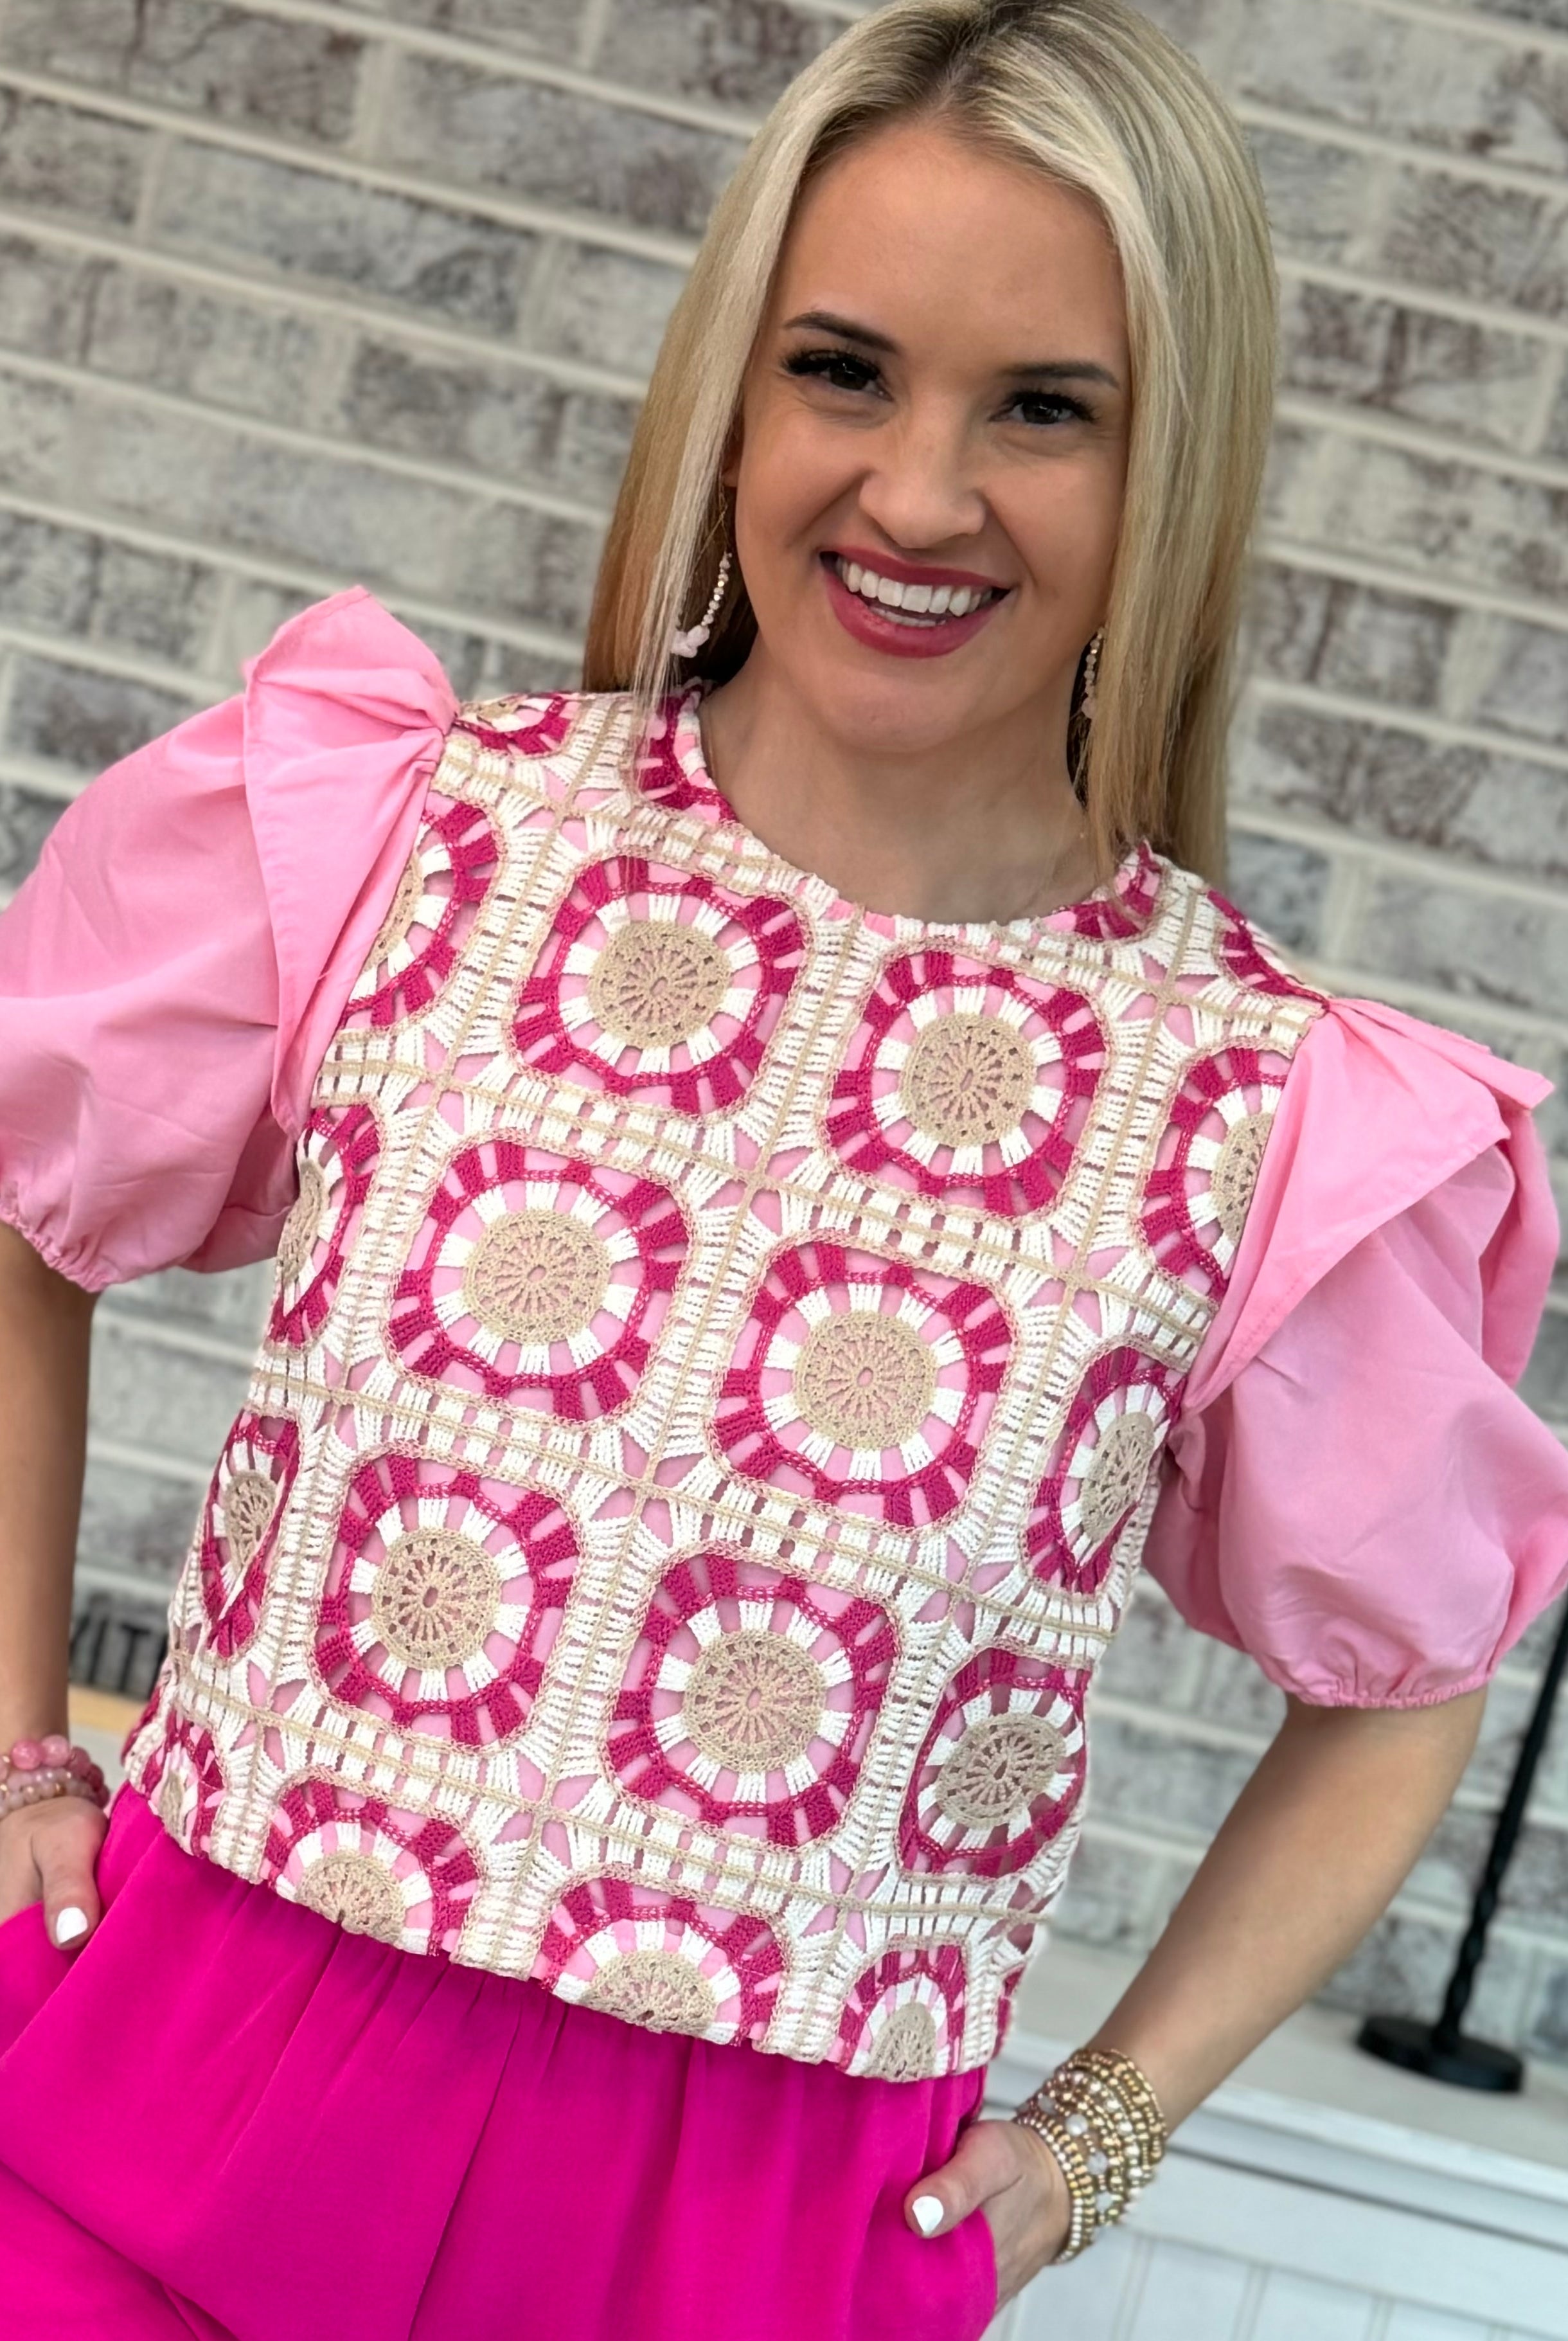 Hello Cutie Crochet Top-100 Short Sleeve Tops-The Lovely Closet-The Lovely Closet, Women's Fashion Boutique in Alexandria, KY